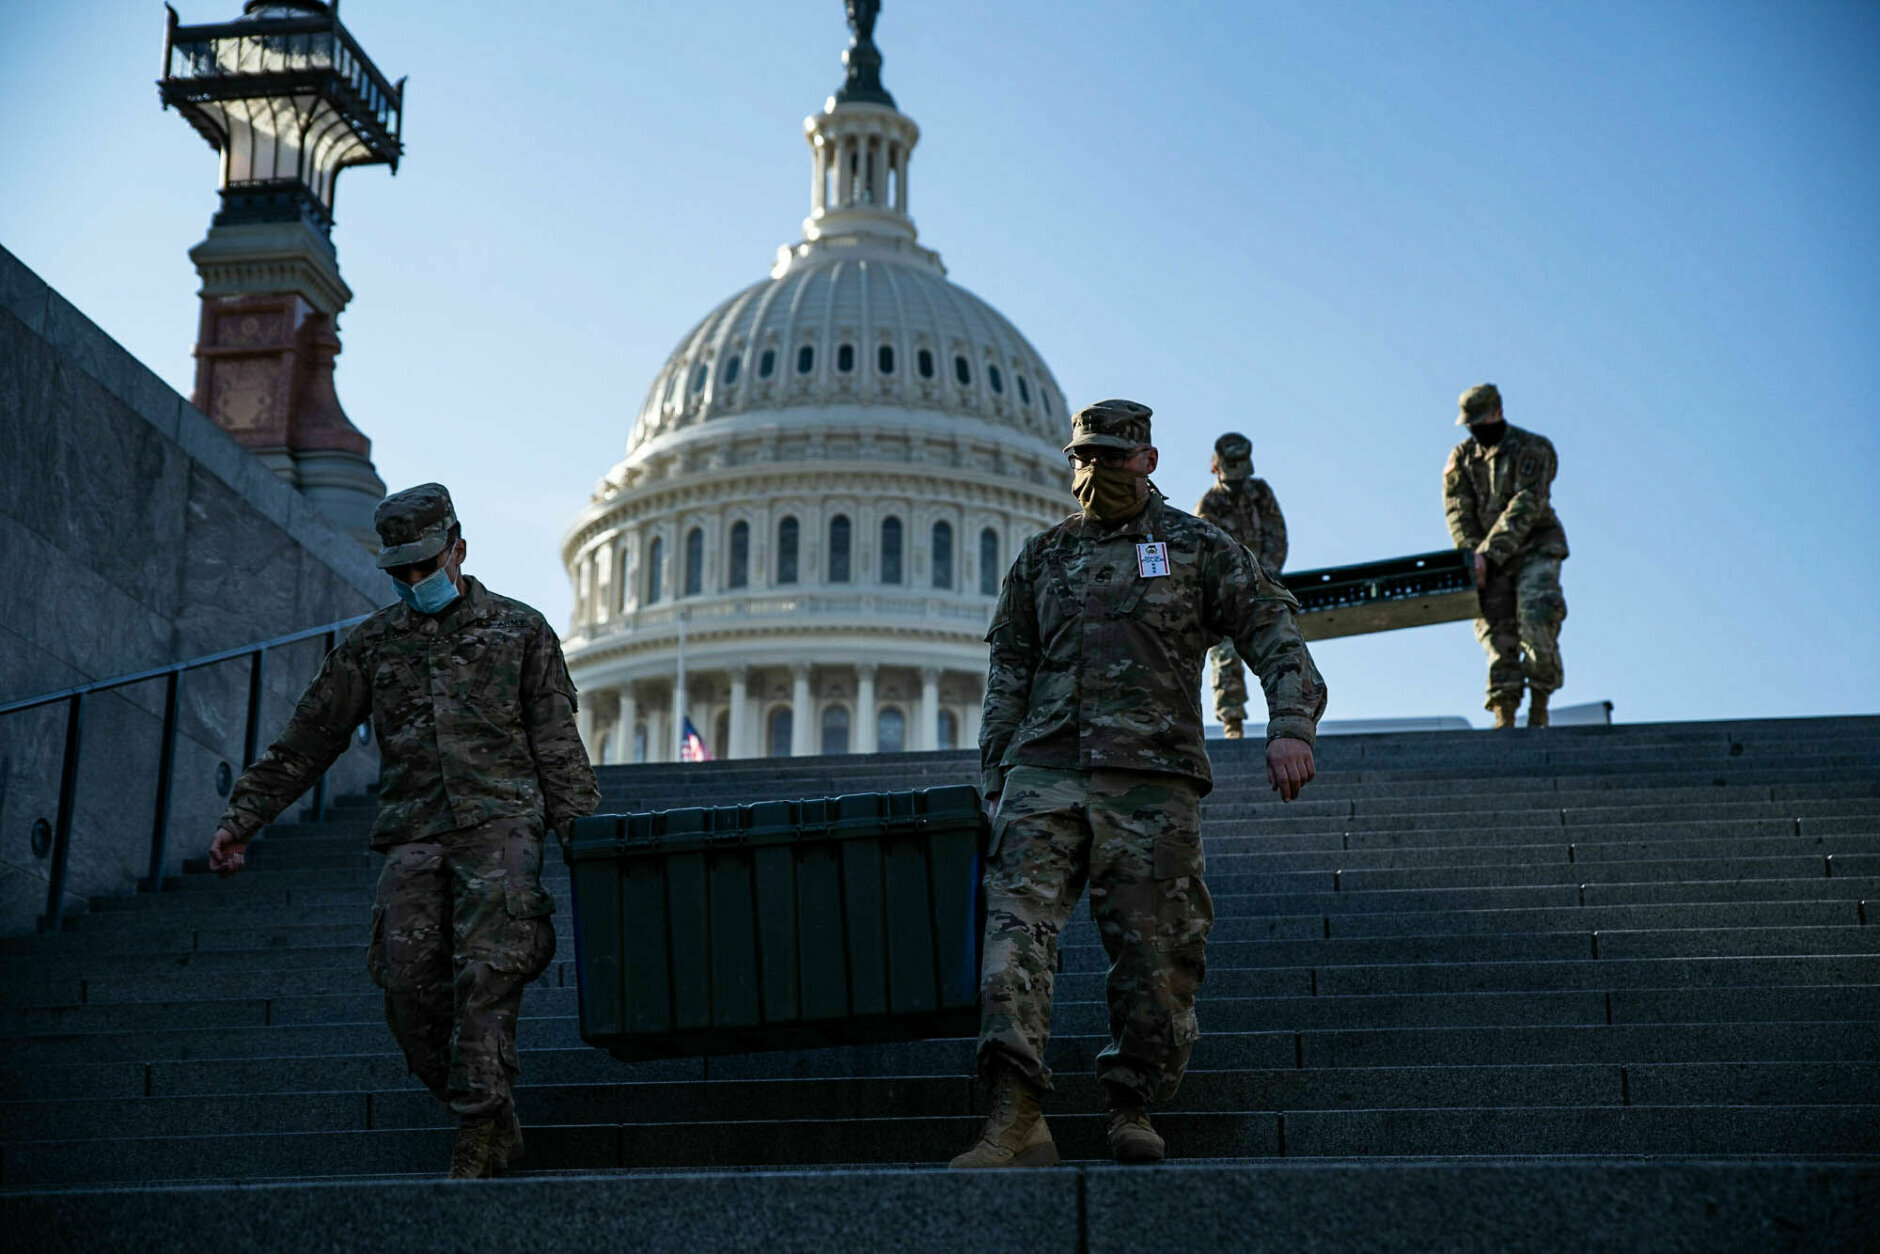 Members of the National Guard transport boxes of weapons near the U.S. Capitol visitor center on Jan. 13, 2021. More than 20,000 armed guardsmen are expected to provide security in the nation's capital amid threats against the inauguration of President-elect Joe Biden. (WTOP/Alejandro Alvarez)